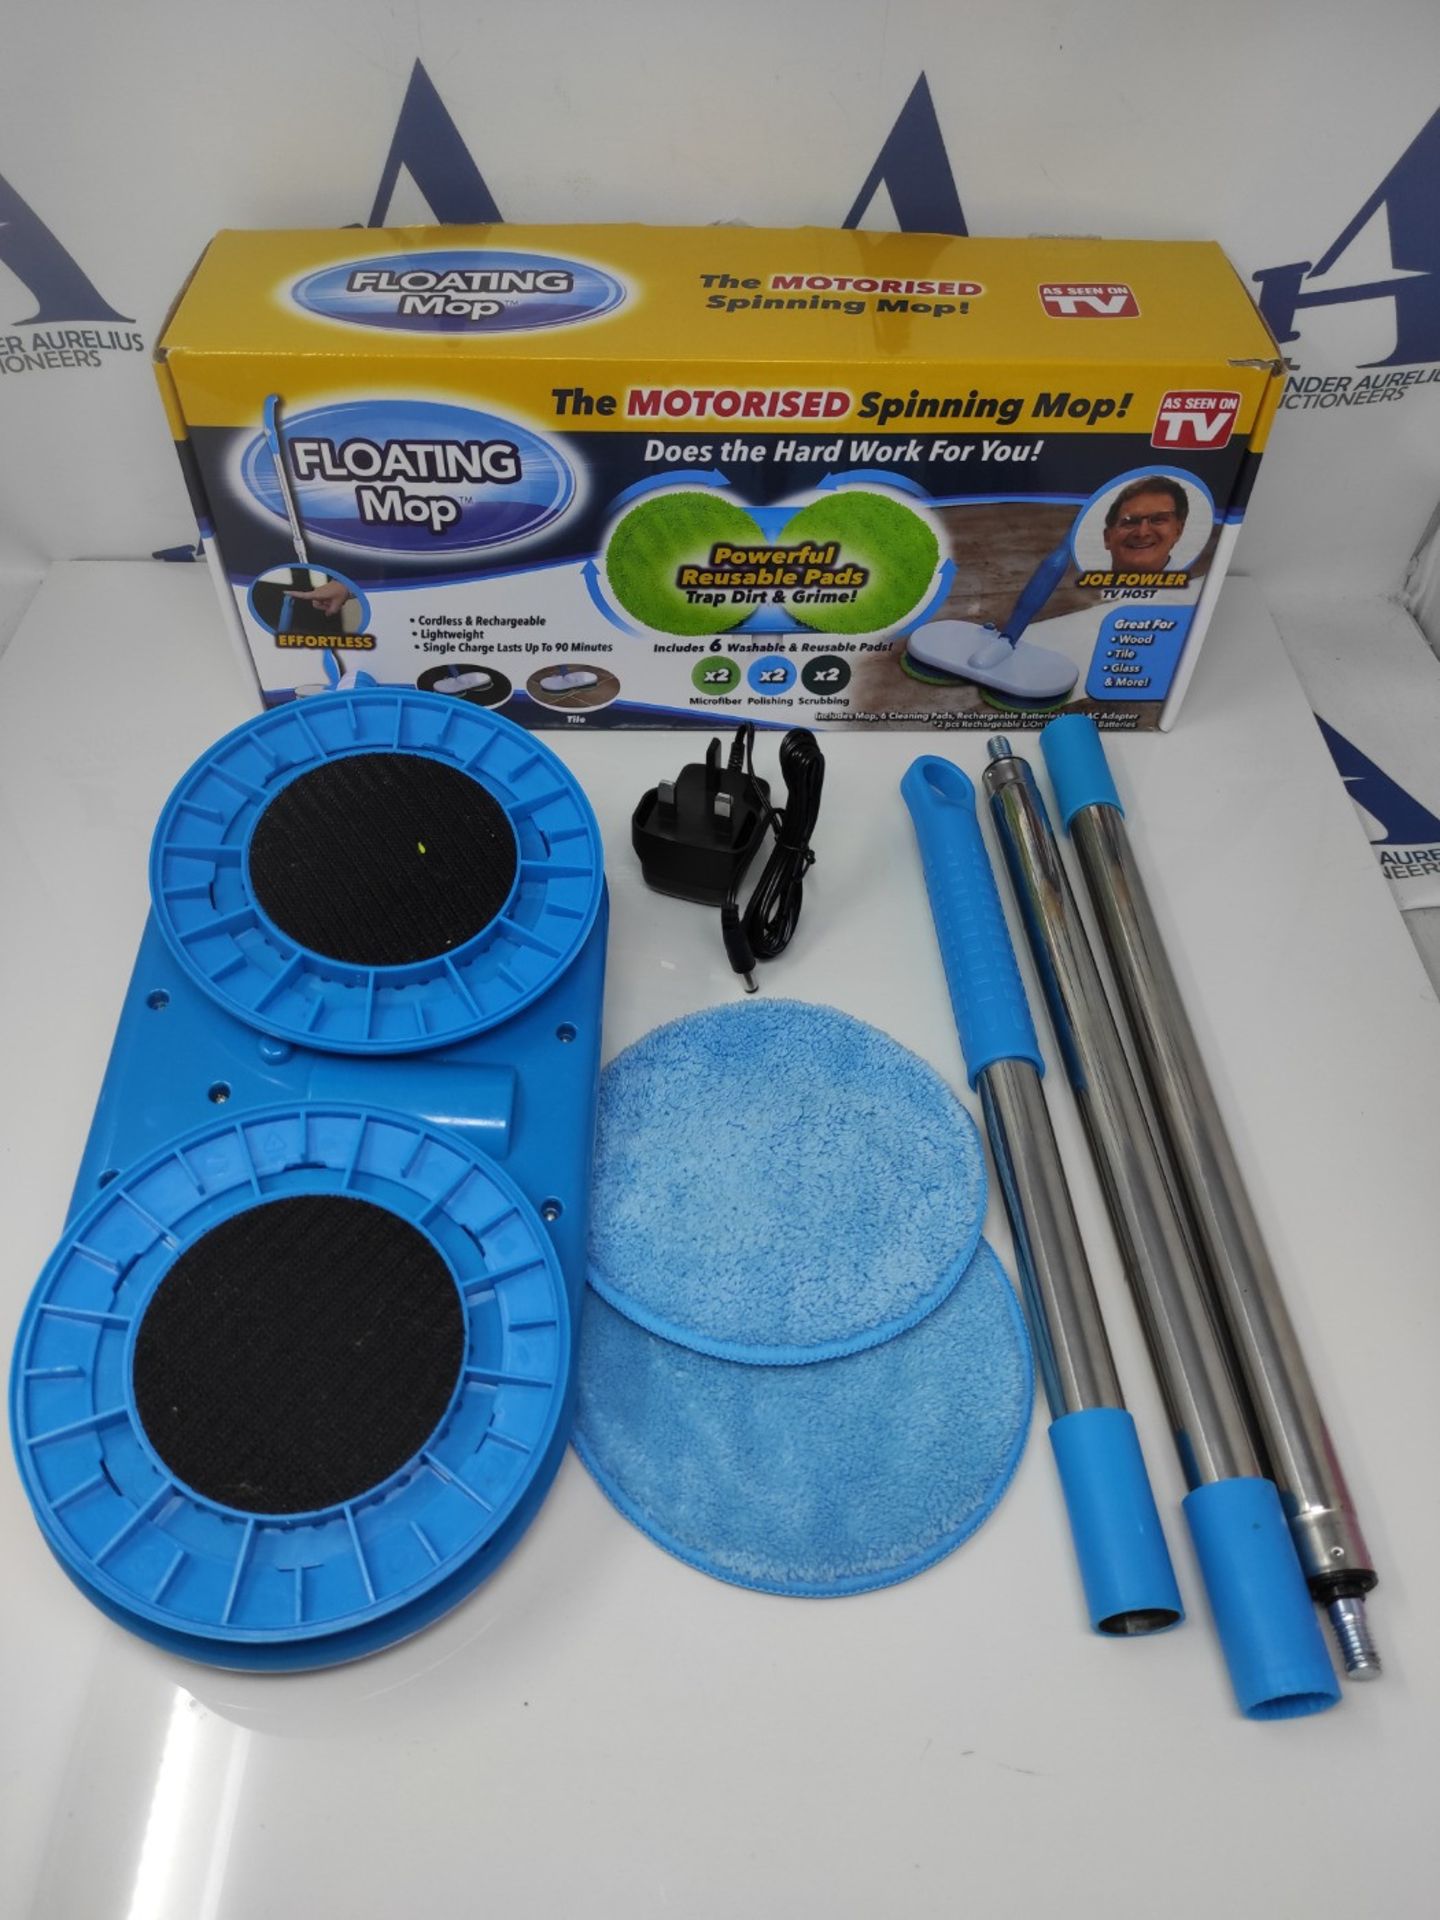 High Street TV Floating Mop - Motorised Cordless & Rechargeable - Spinning Mop - Inclu - Image 2 of 2